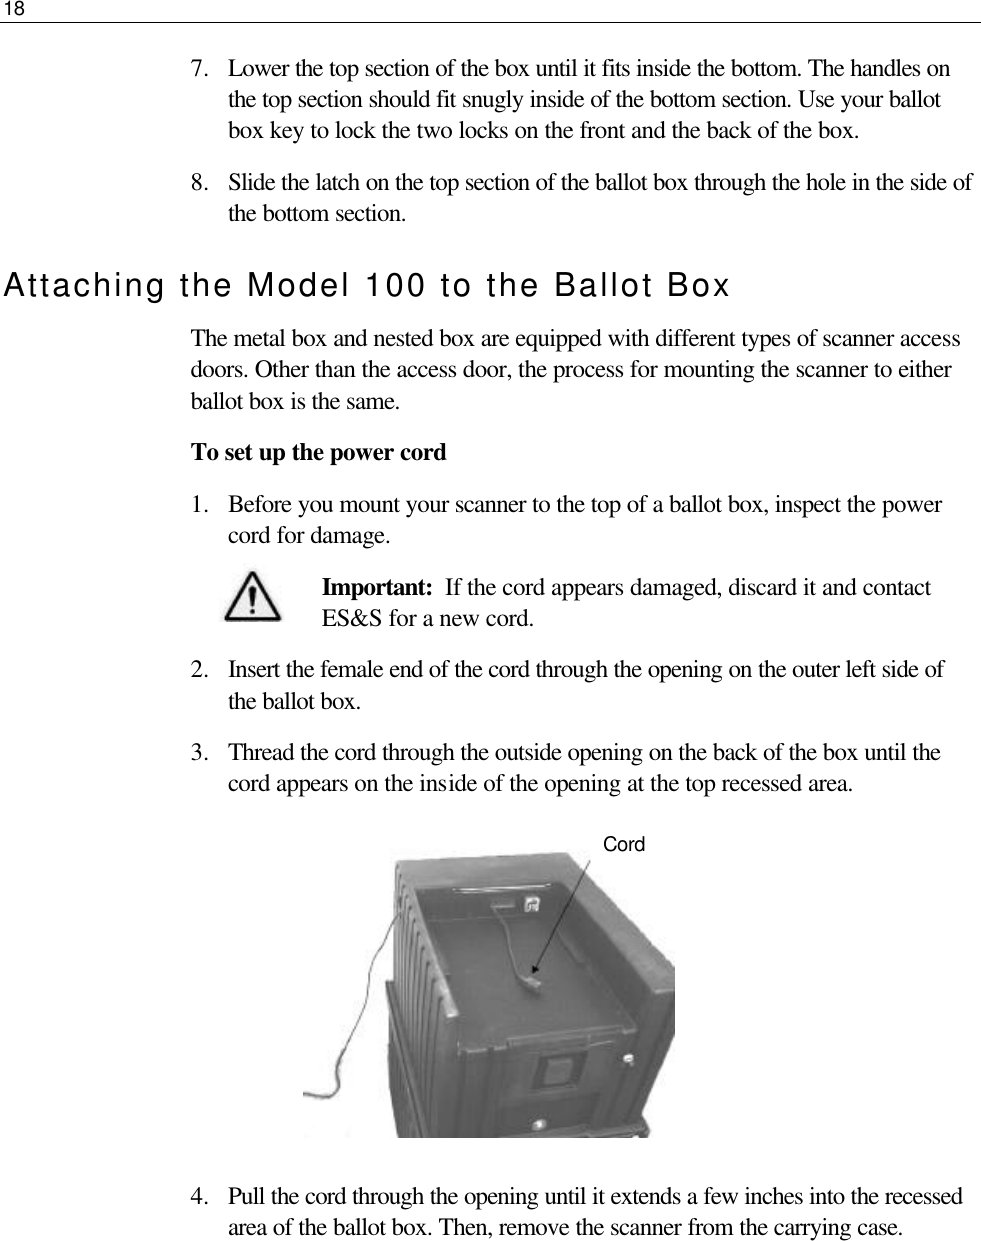 18  7.  Lower the top section of the box until it fits inside the bottom. The handles on the top section should fit snugly inside of the bottom section. Use your ballot box key to lock the two locks on the front and the back of the box.  8.  Slide the latch on the top section of the ballot box through the hole in the side of the bottom section. Attaching the Model 100 to the Ballot Box The metal box and nested box are equipped with different types of scanner access doors. Other than the access door, the process for mounting the scanner to either ballot box is the same. To set up the power cord 1.  Before you mount your scanner to the top of a ballot box, inspect the power cord for damage. Important:  If the cord appears damaged, discard it and contact ES&amp;S for a new cord.  2.  Insert the female end of the cord through the opening on the outer left side of the ballot box. 3.  Thread the cord through the outside opening on the back of the box until the cord appears on the inside of the opening at the top recessed area.               4.  Pull the cord through the opening until it extends a few inches into the recessed area of the ballot box. Then, remove the scanner from the carrying case.     Cord 